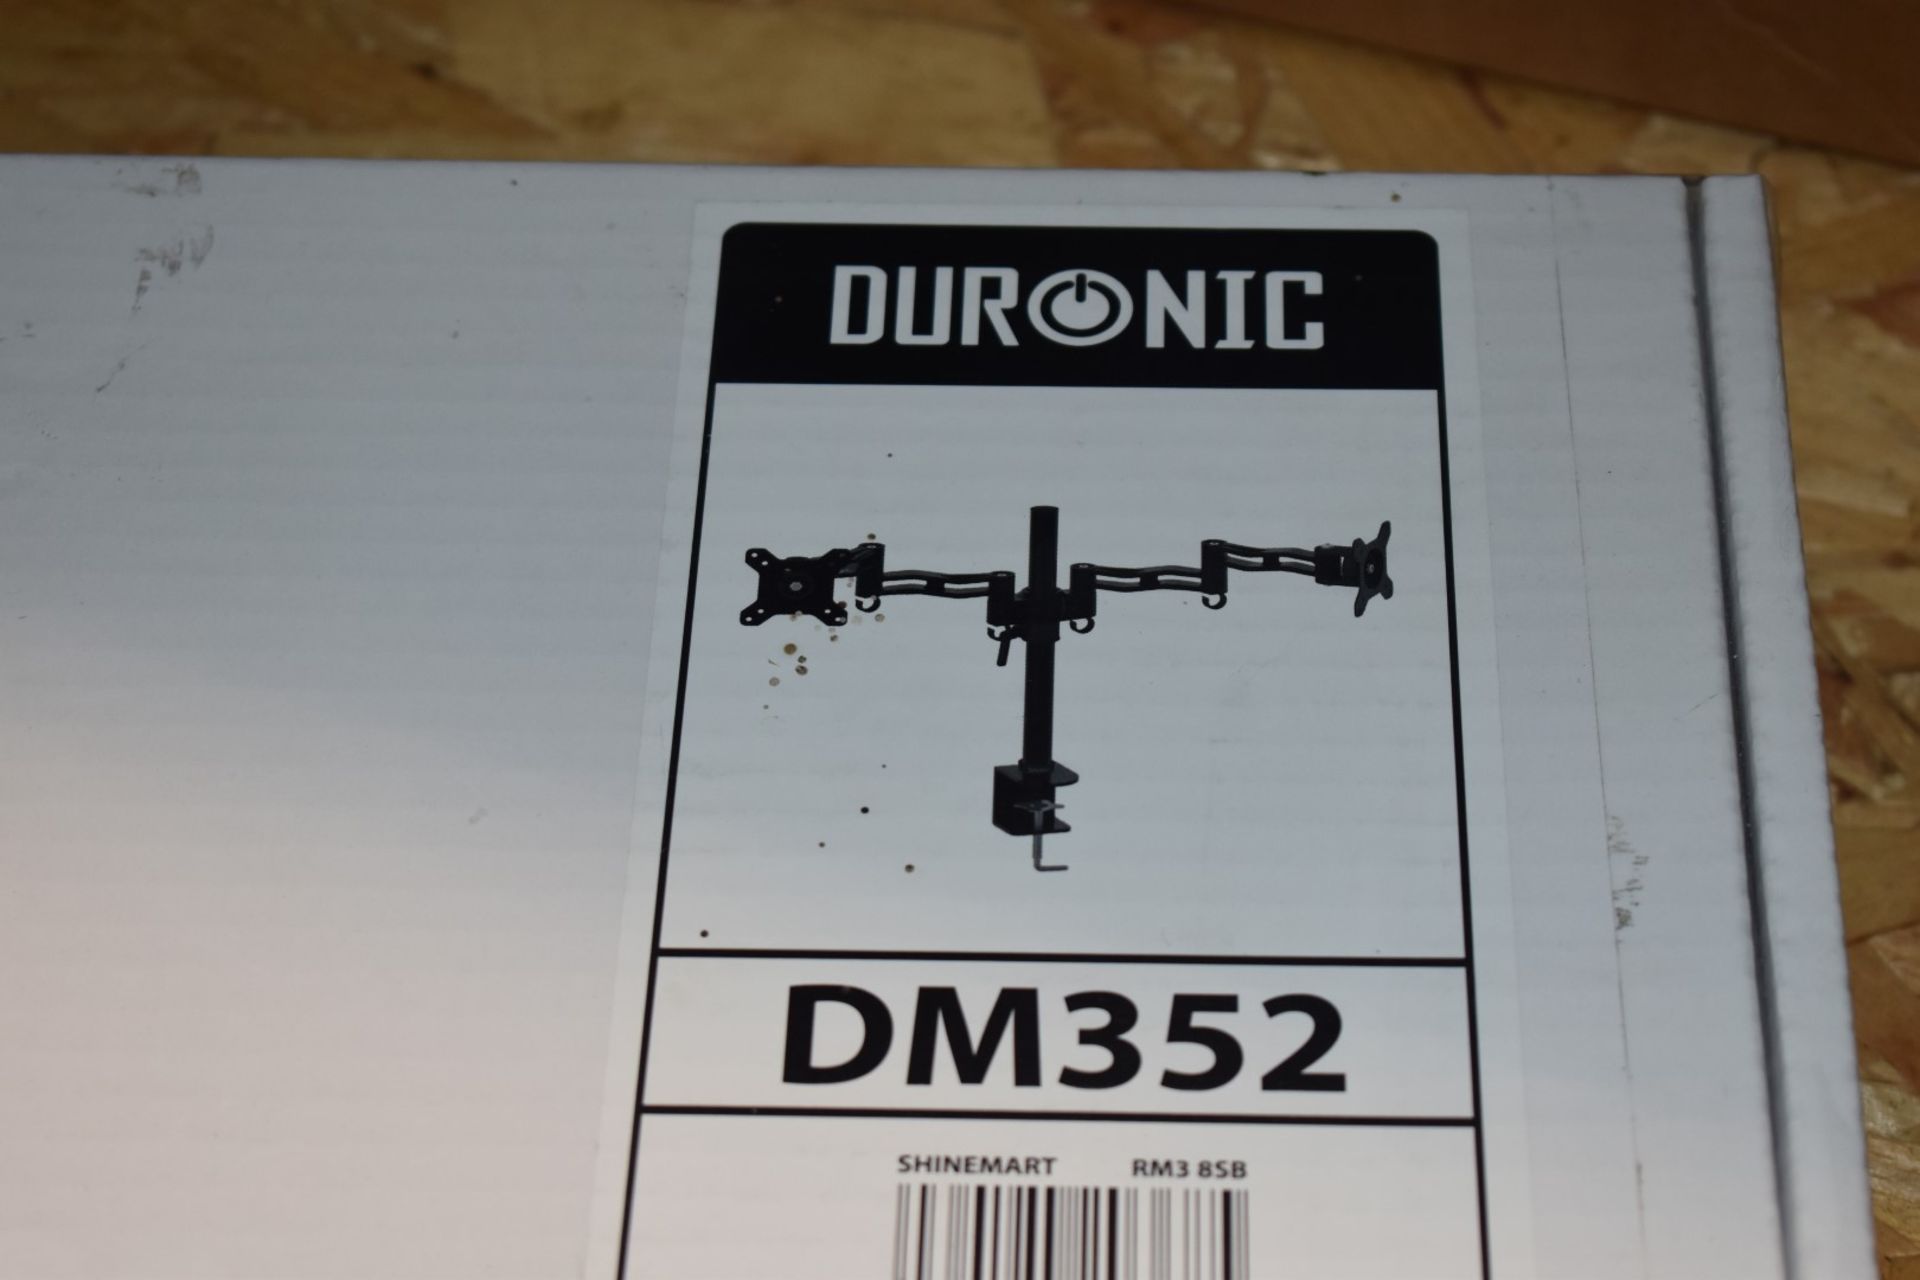 1 x Duronic DM252 Double PC Desk Mount For Monitors Suitable For Monitors of 13 to 27 Inch - Image 2 of 2